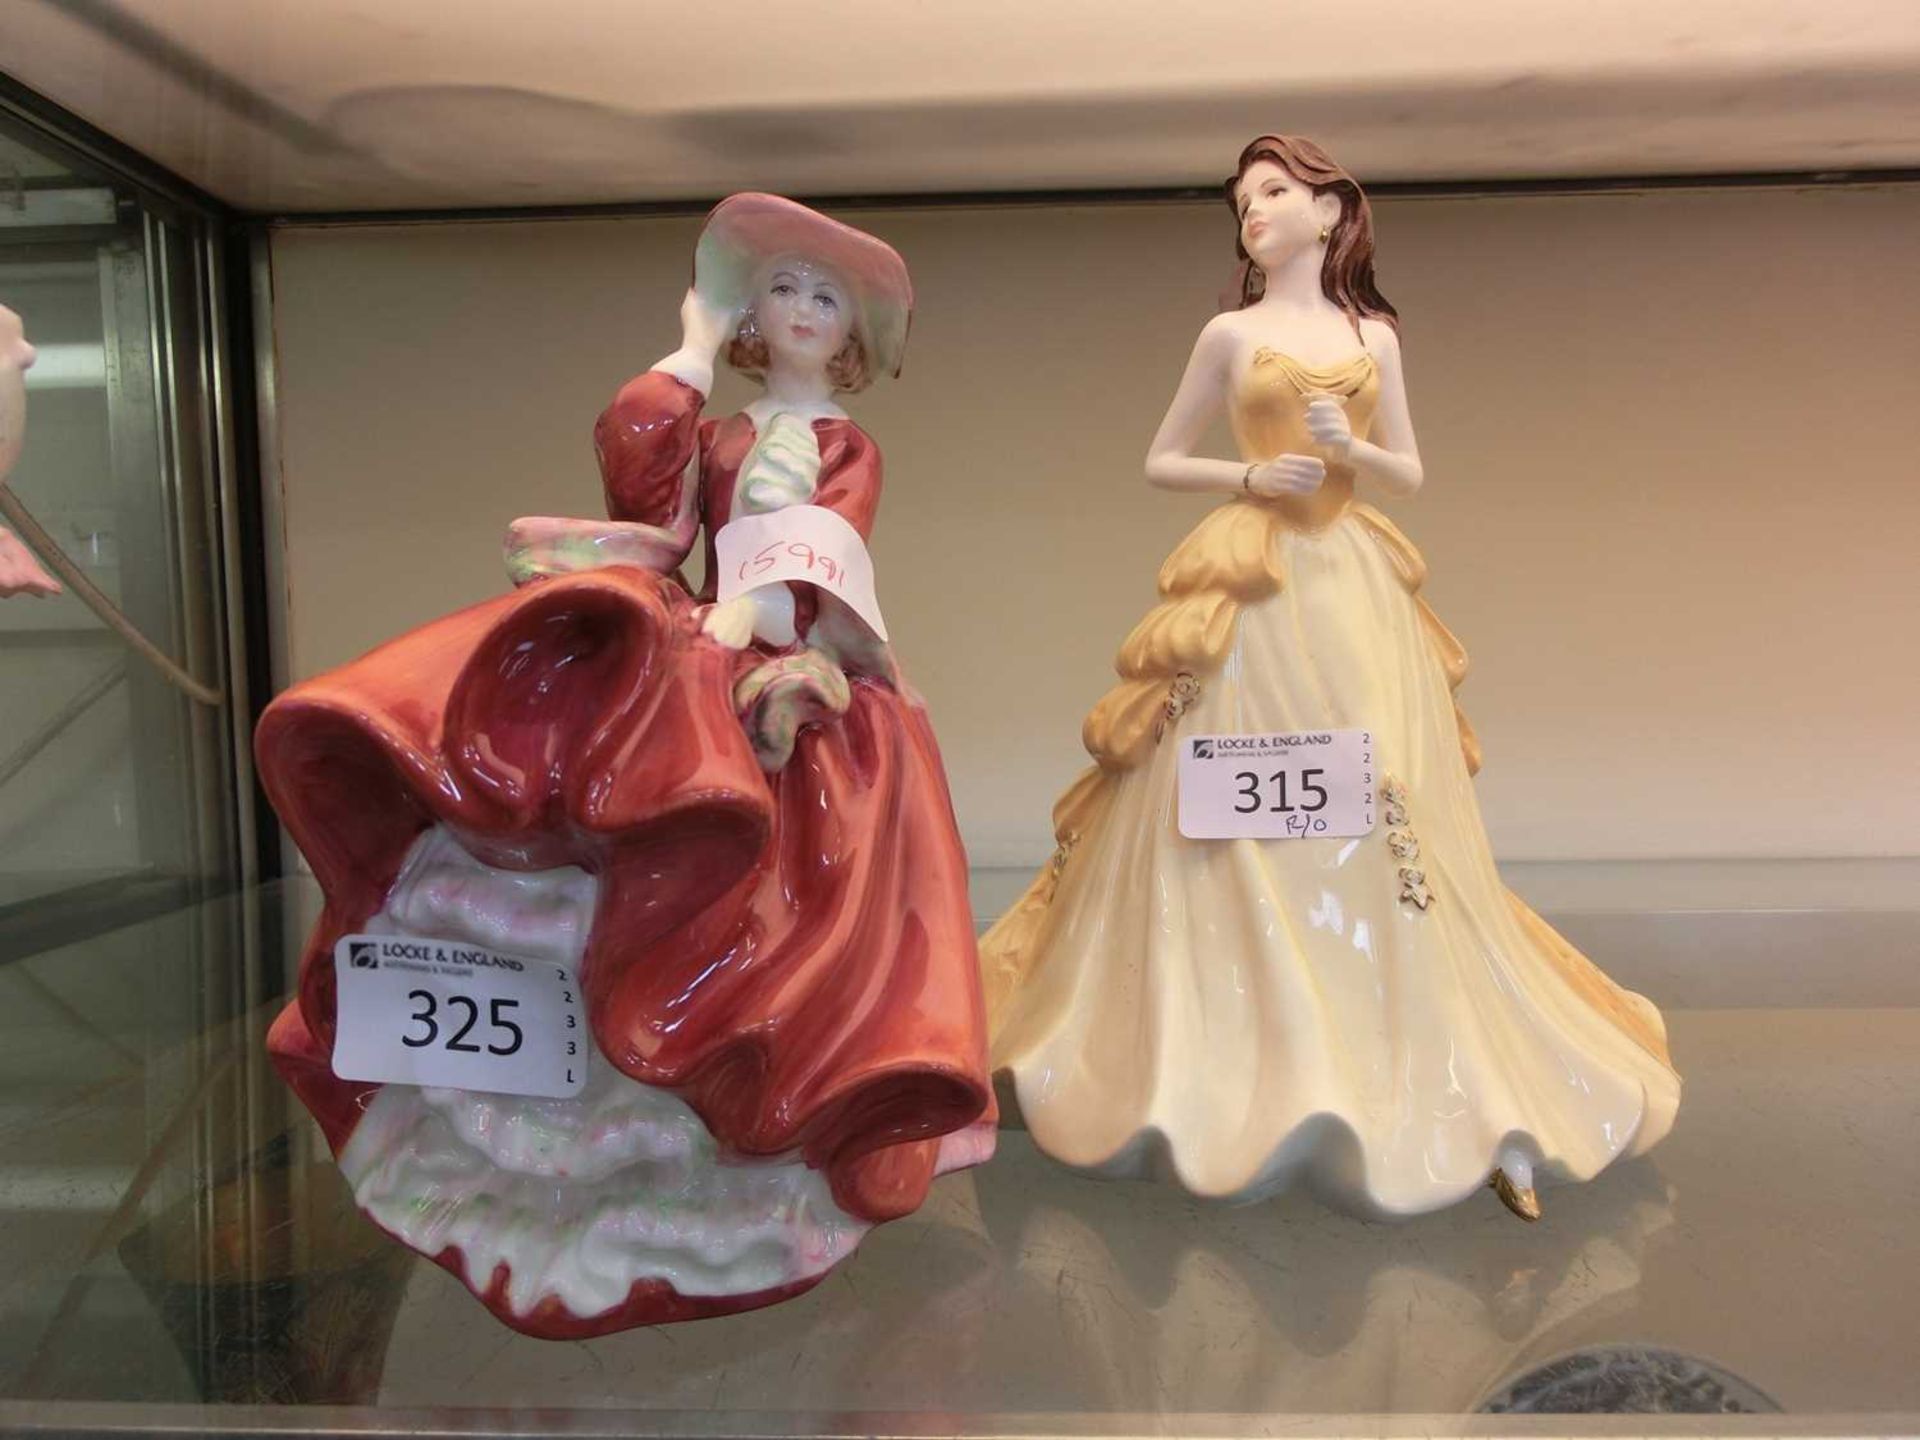 2 ceramic figurines incl. Royal Doulton, Top o' the Hill HN1834 and Coalport figurine, Golden